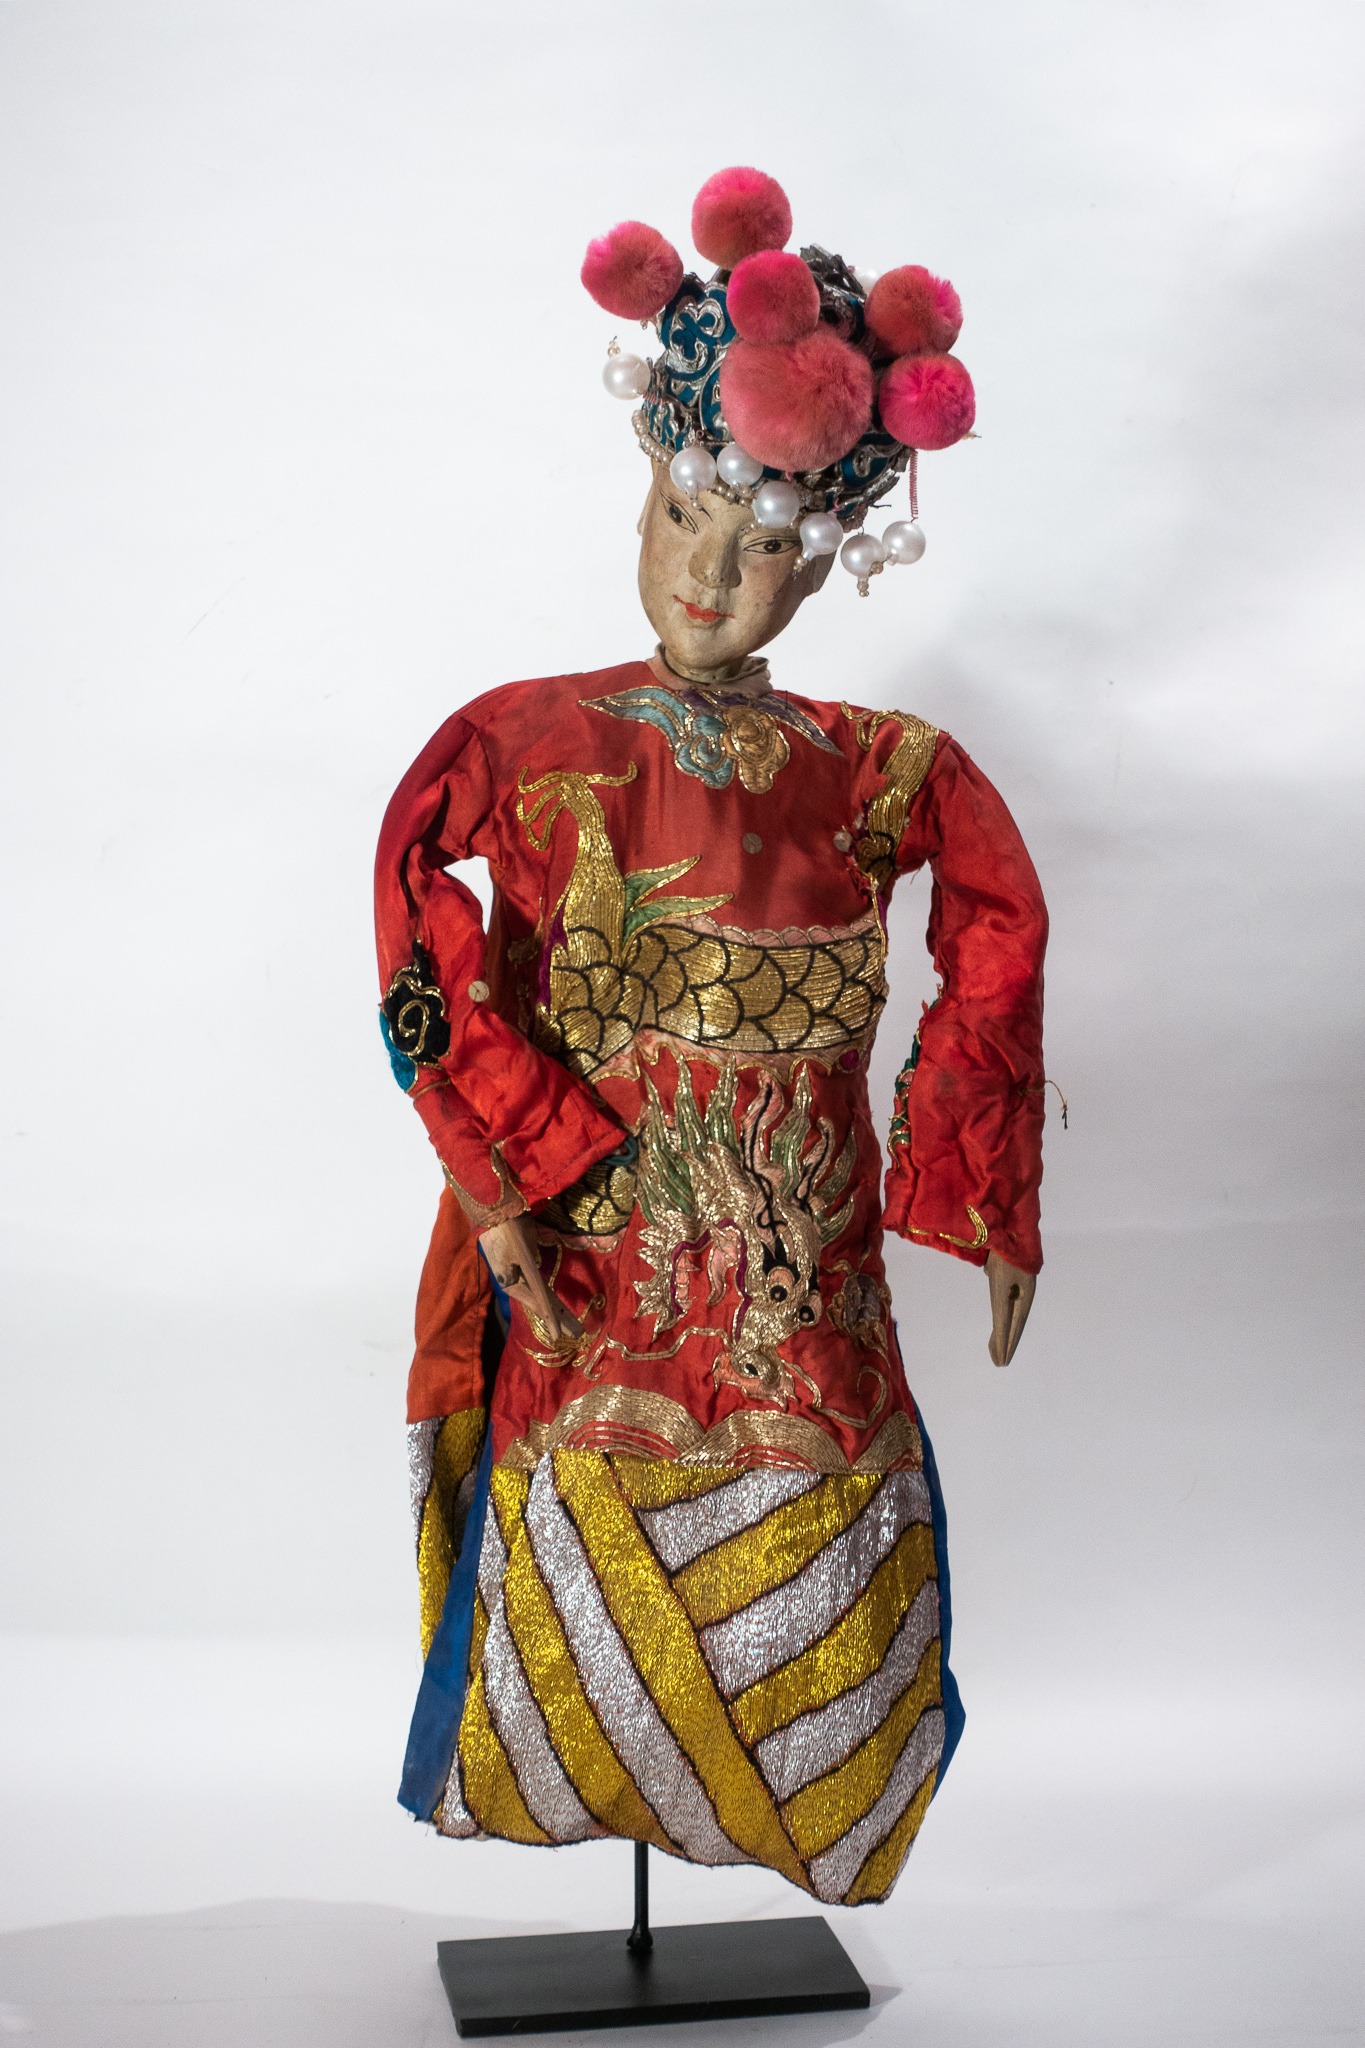 Chinese Opera Theatre Marionette, Red Silk Robe, Pink Pom Poms